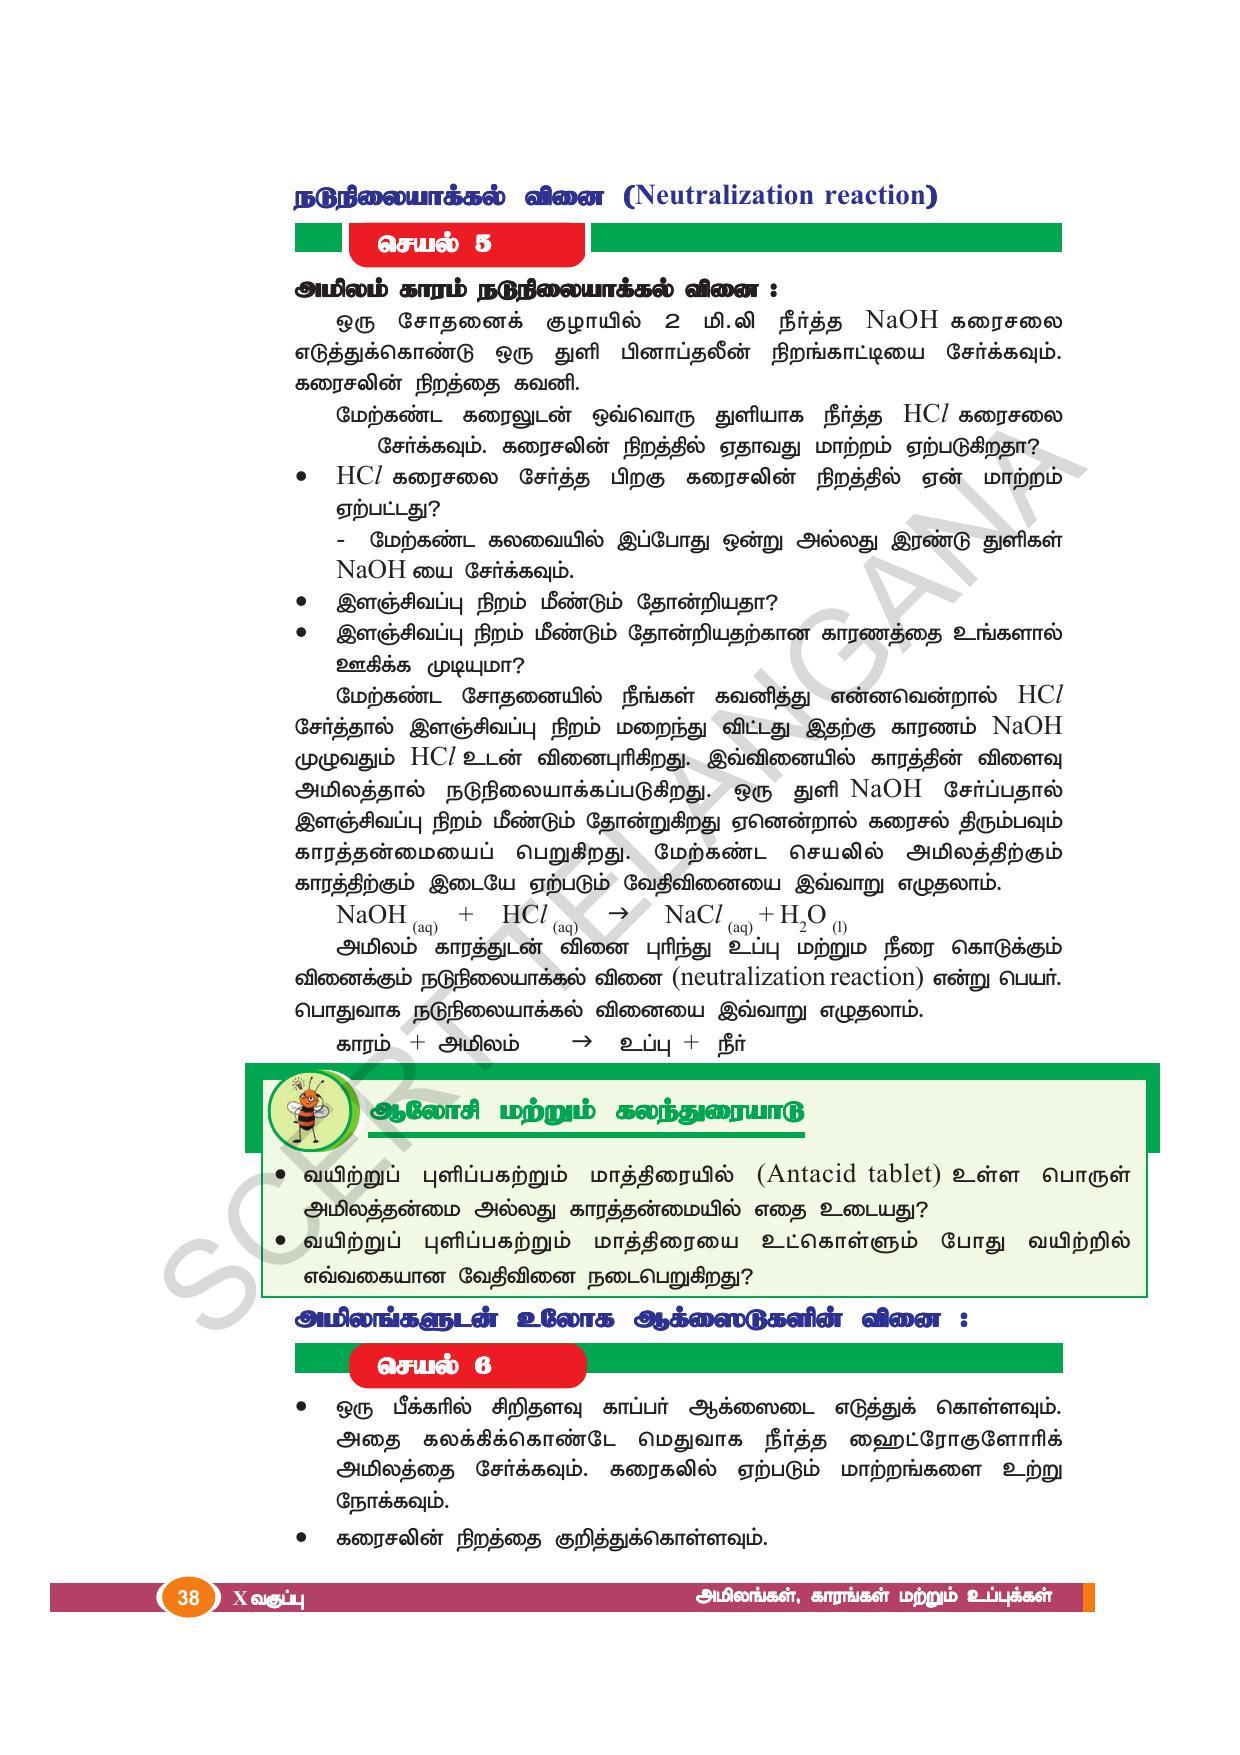 TS SCERT Class 10 Physical Science(Tamil Medium) Text Book - Page 50